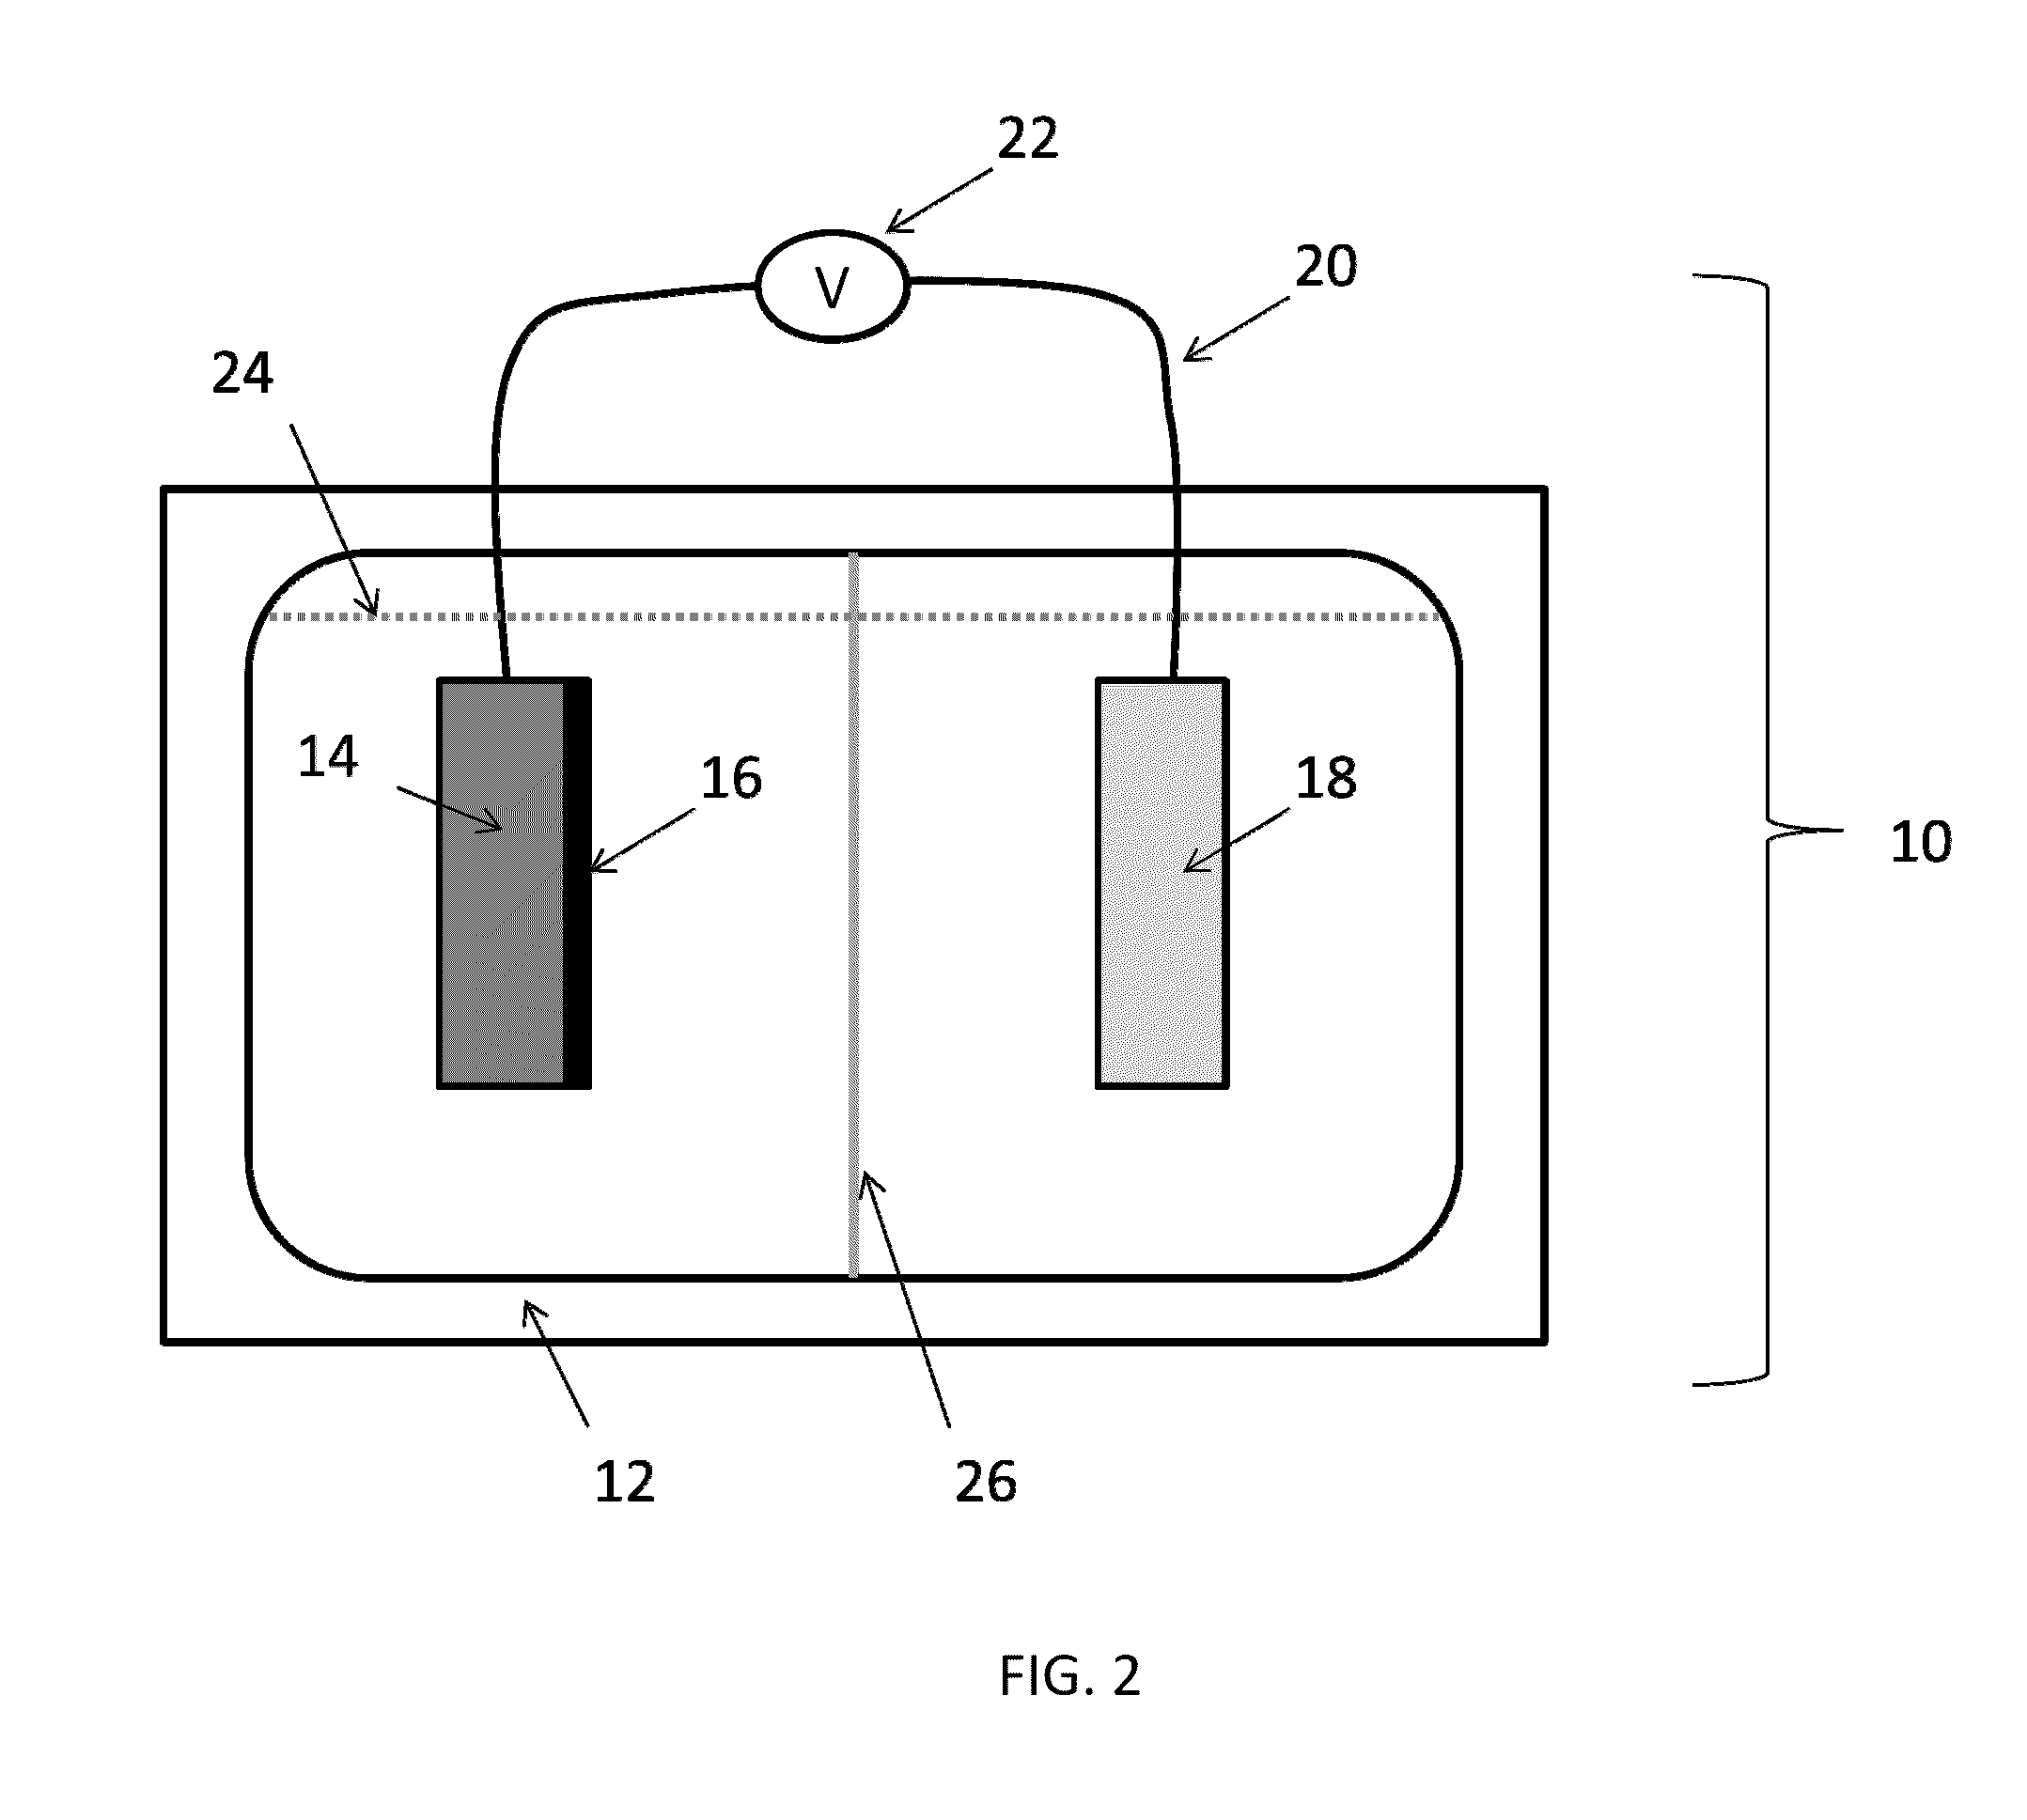 Efficient water oxidation catalysts and methods of energy production